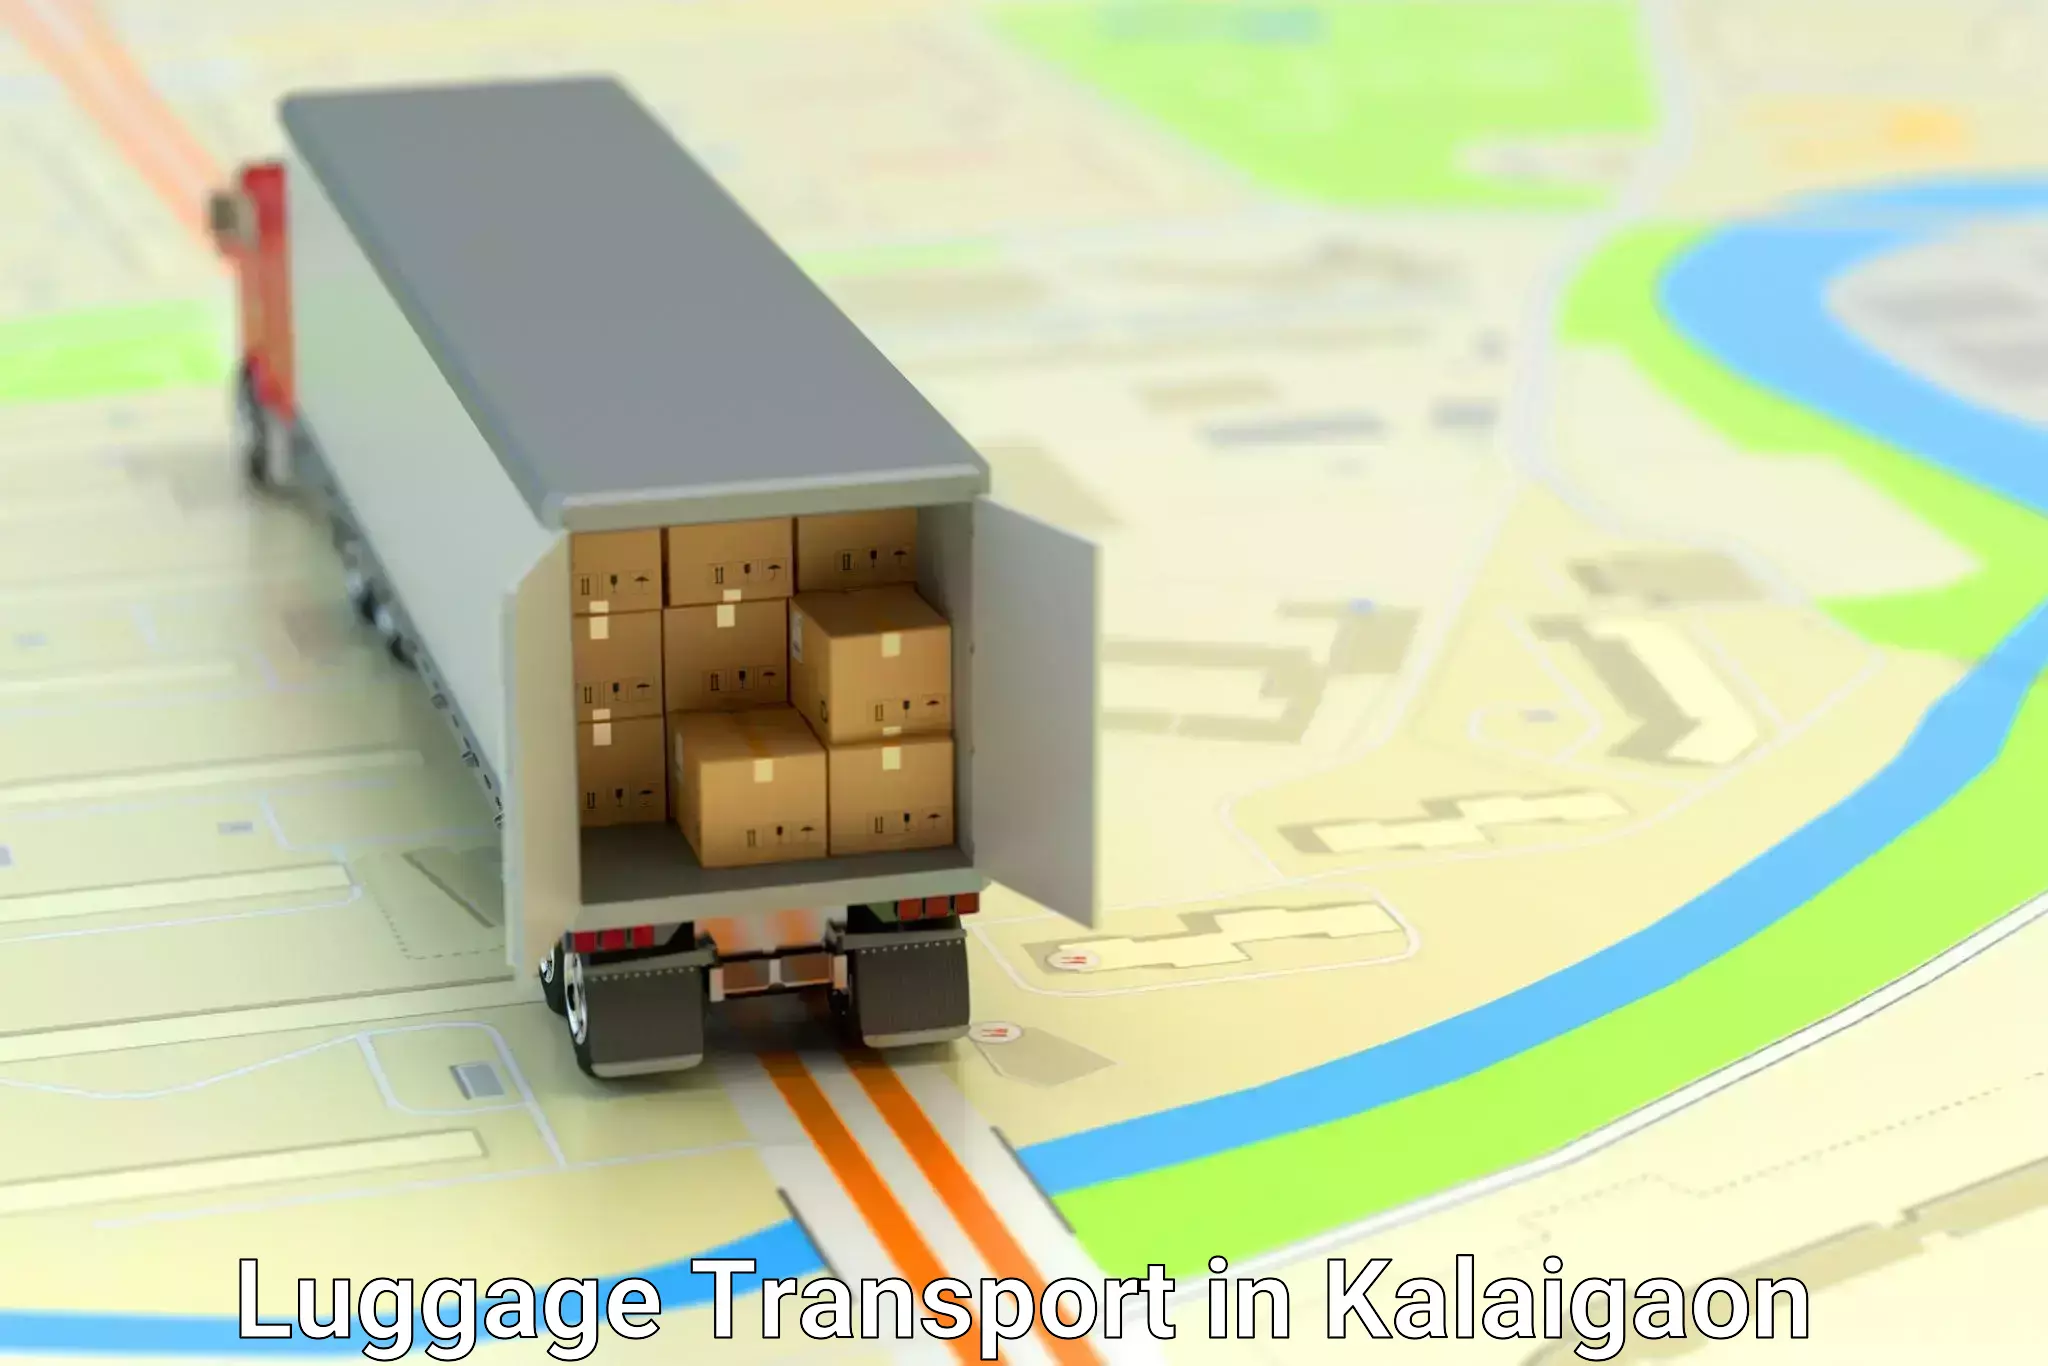 Luggage transport consulting in Kalaigaon